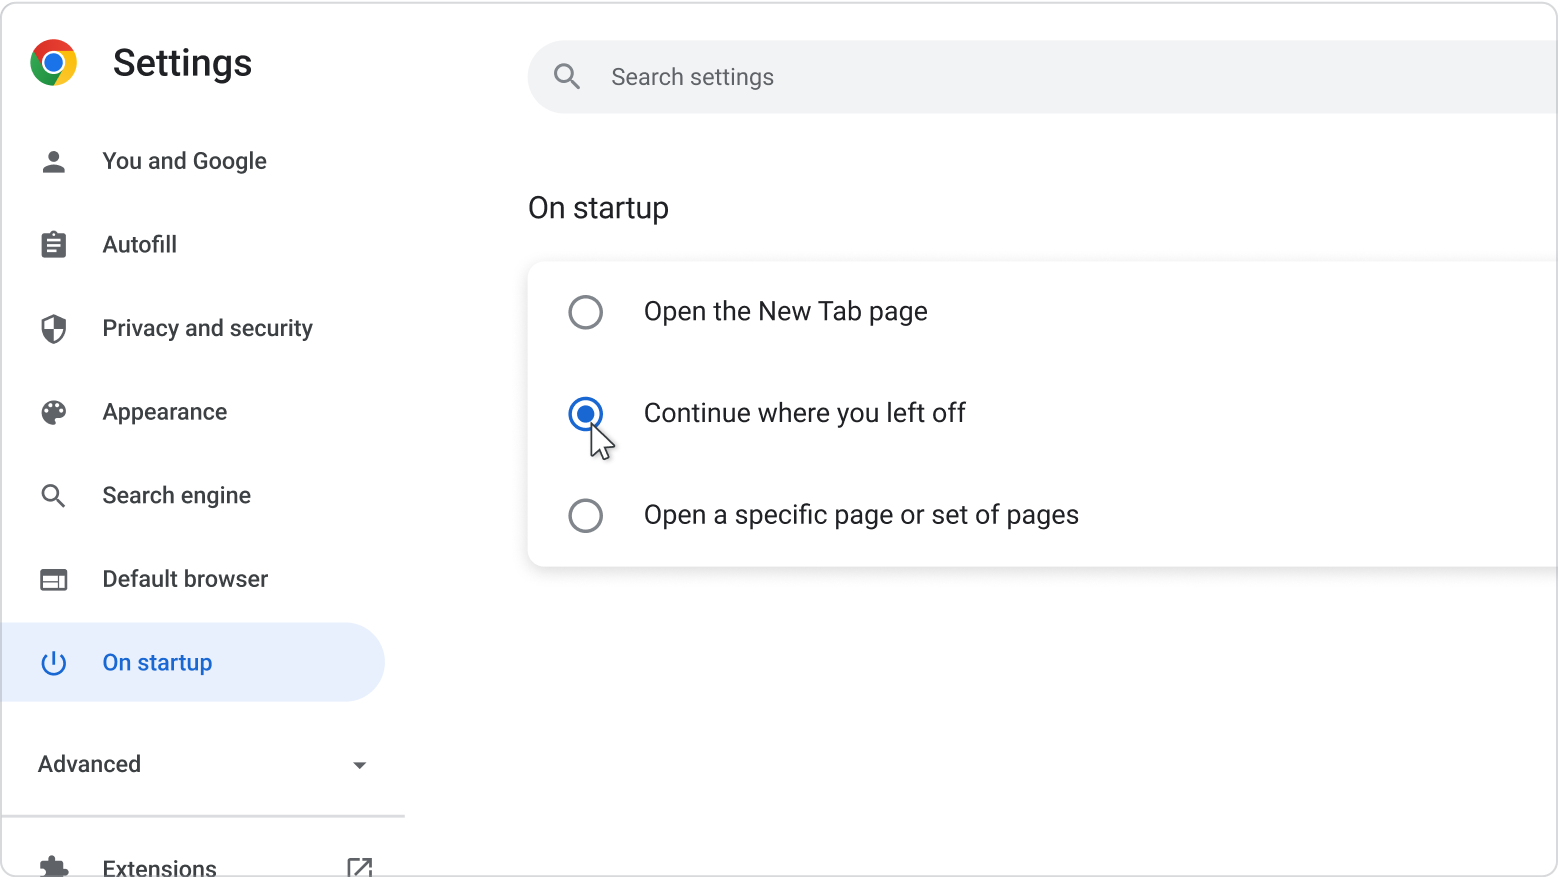 https://www.google.com/chrome/static/images/whats-new/104/on-startup-2x.png